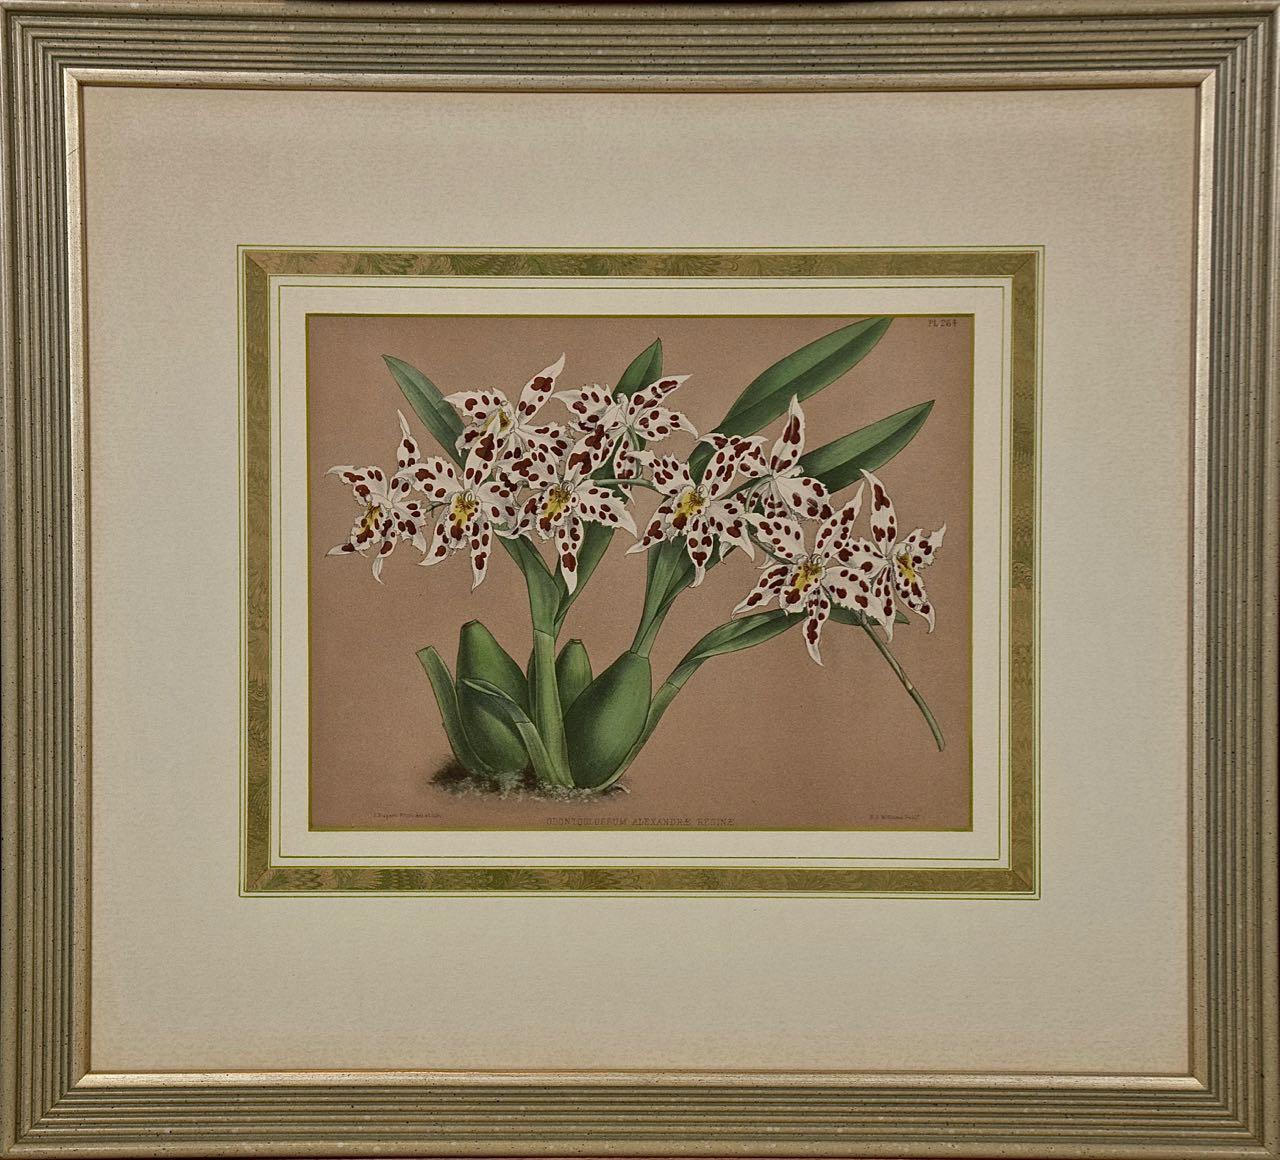 John Nugent Fitch Landscape Print - Orchids: Framed 19th C. Hand-colored lithograph of "Alexandrae Reginae" by Fitch